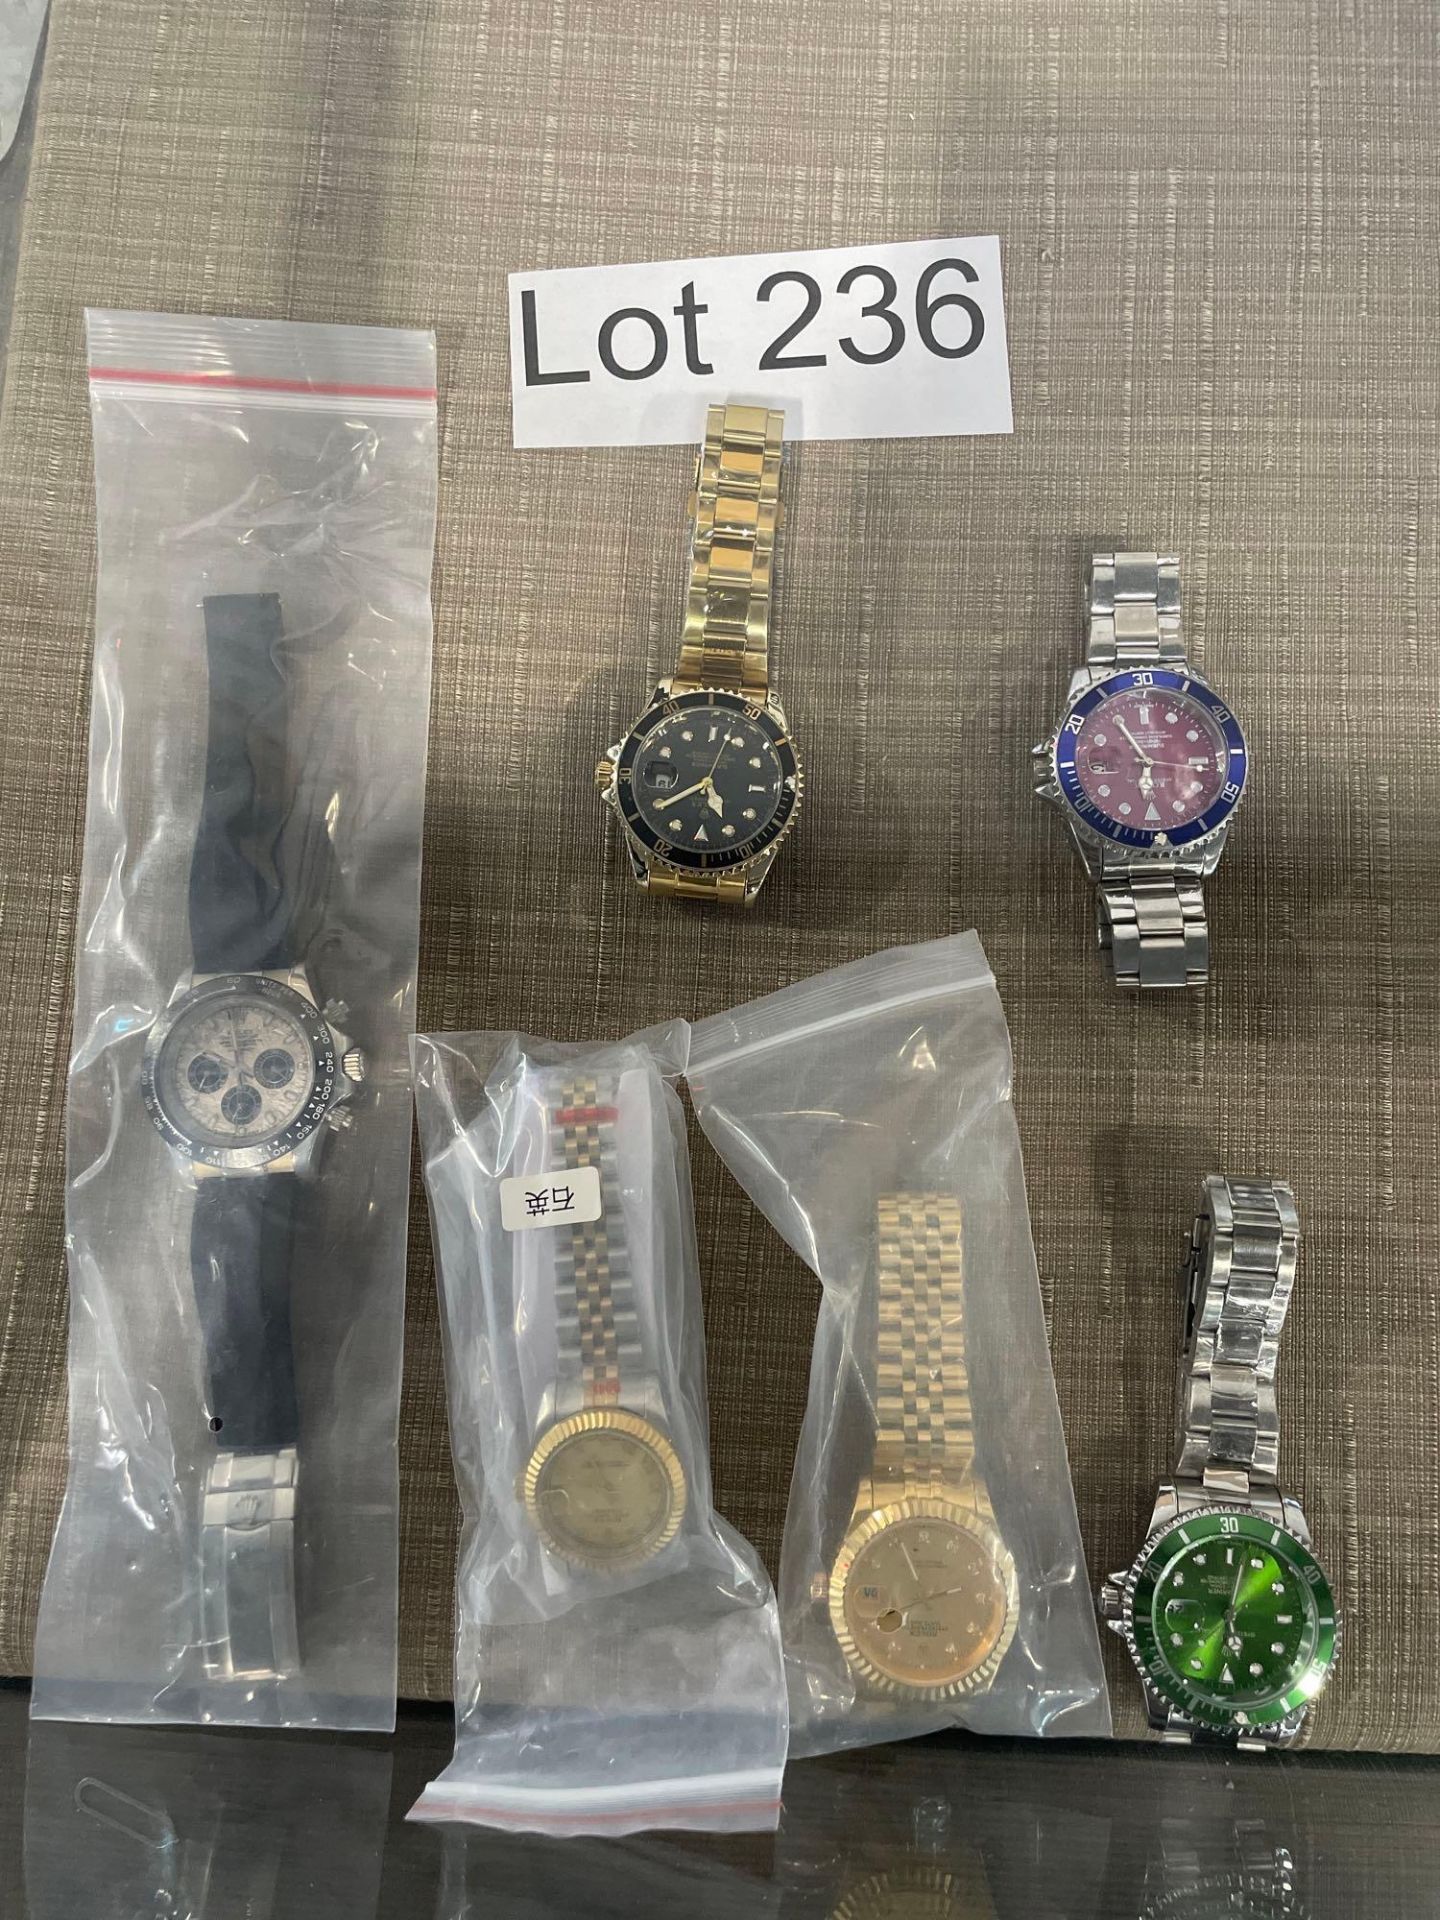 6 Replica Rolex watches ( not real)